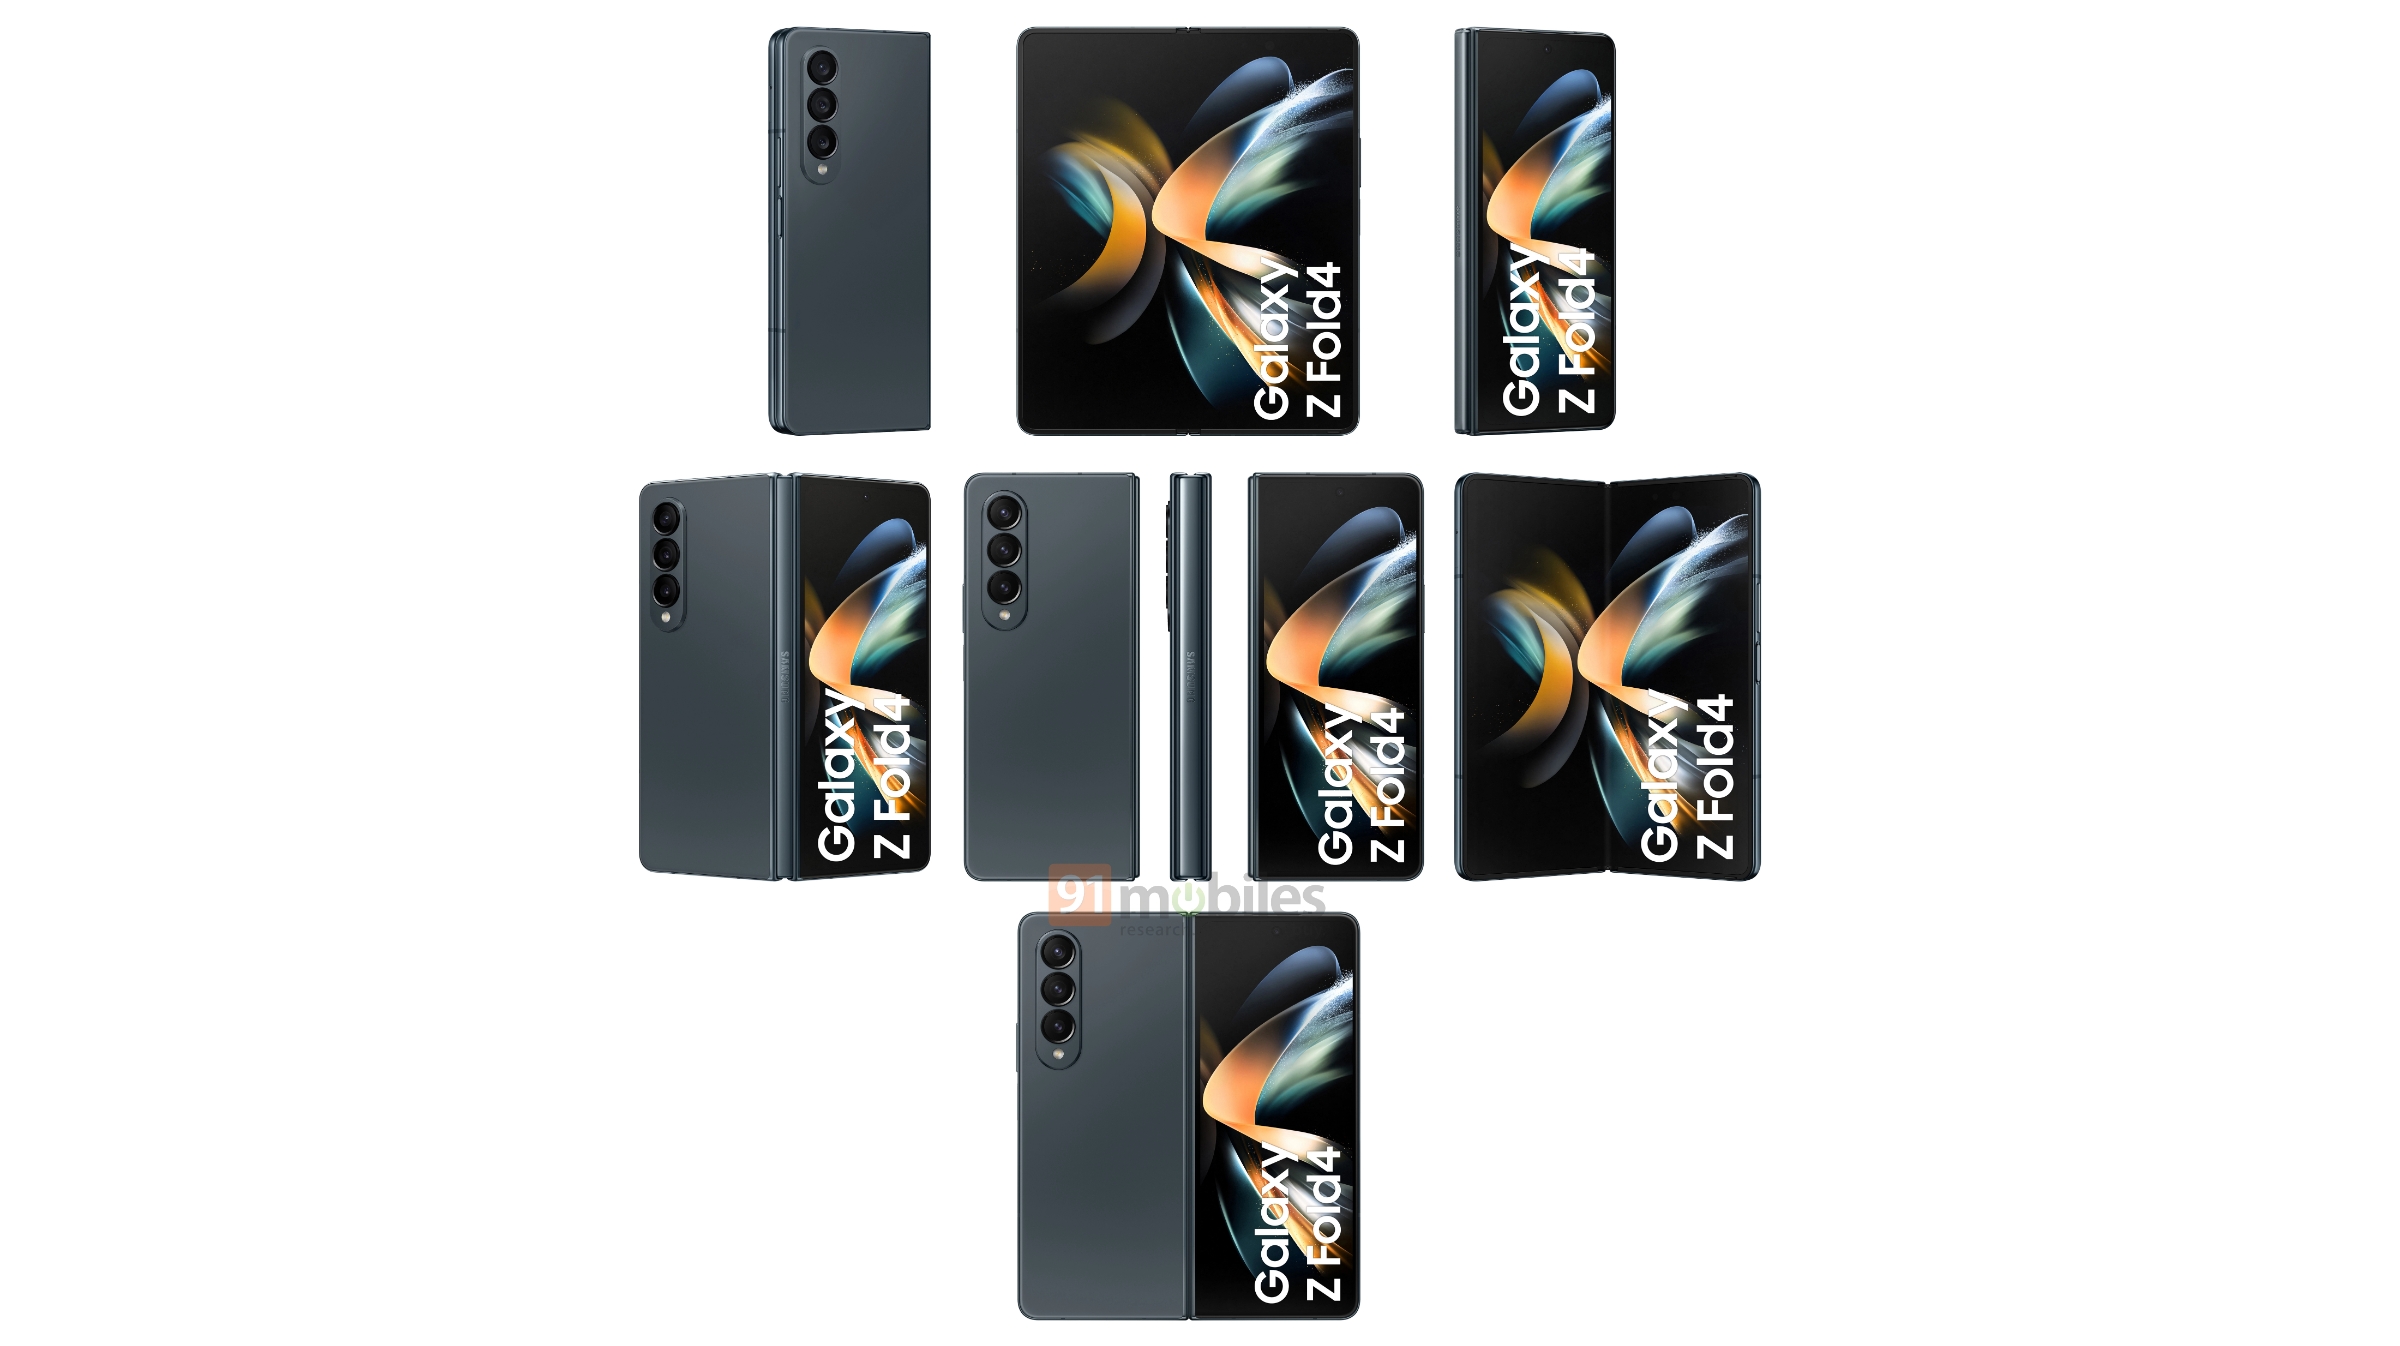 Leaked renders showing the Samsung Galaxy Z Fold 4 from a variety of angles